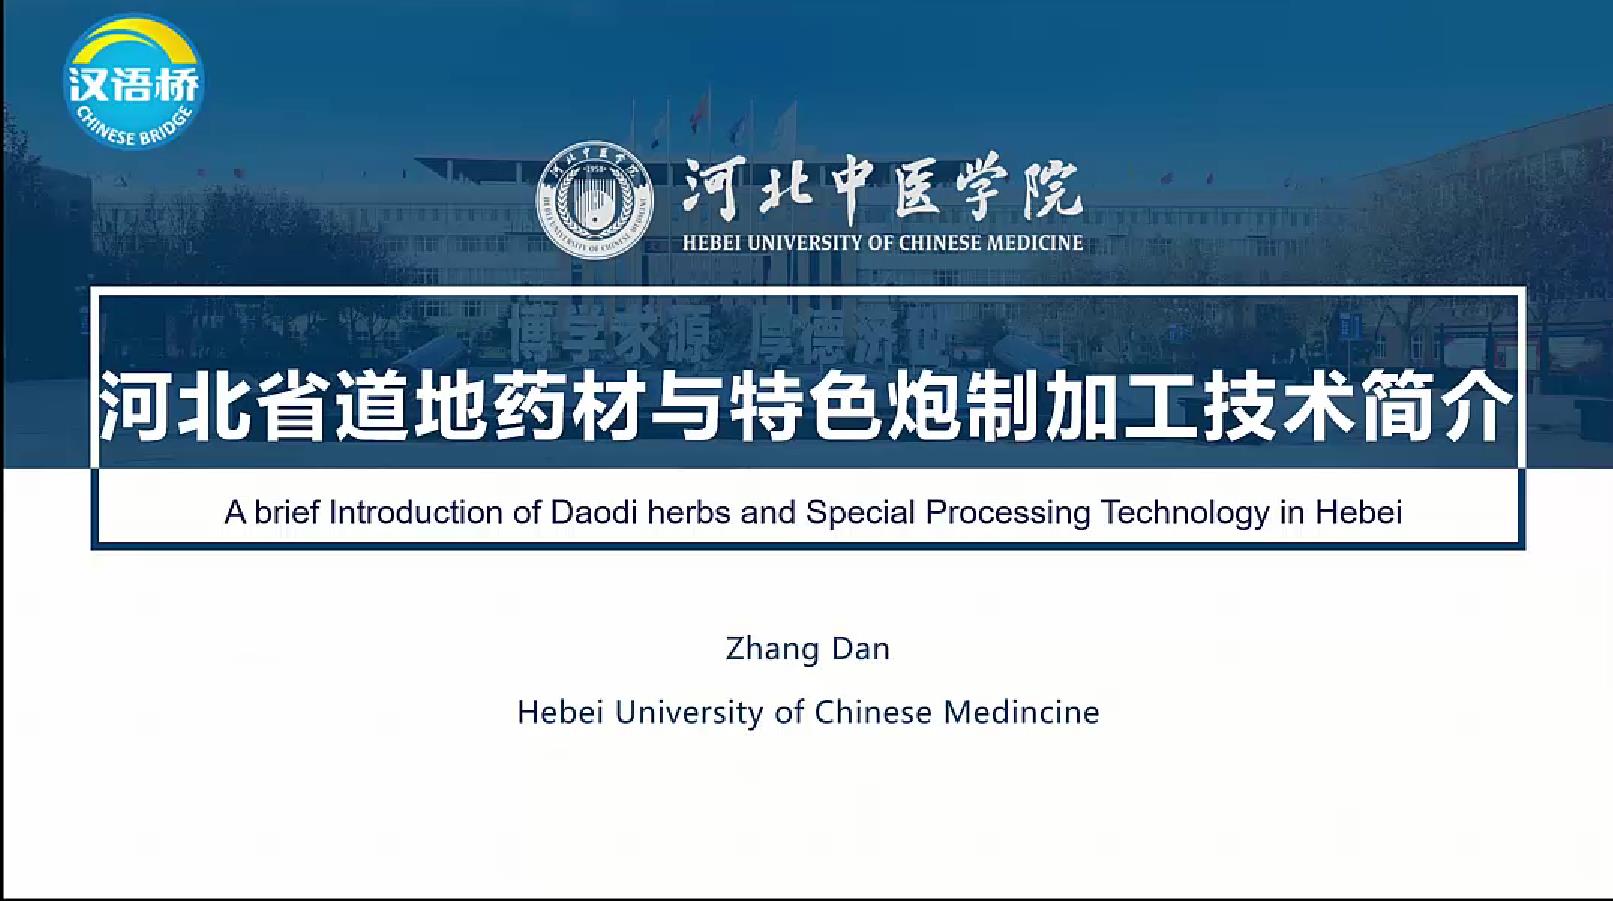 A brief Introduction of Daodi Herbs and Special Processing Technology in Hebei